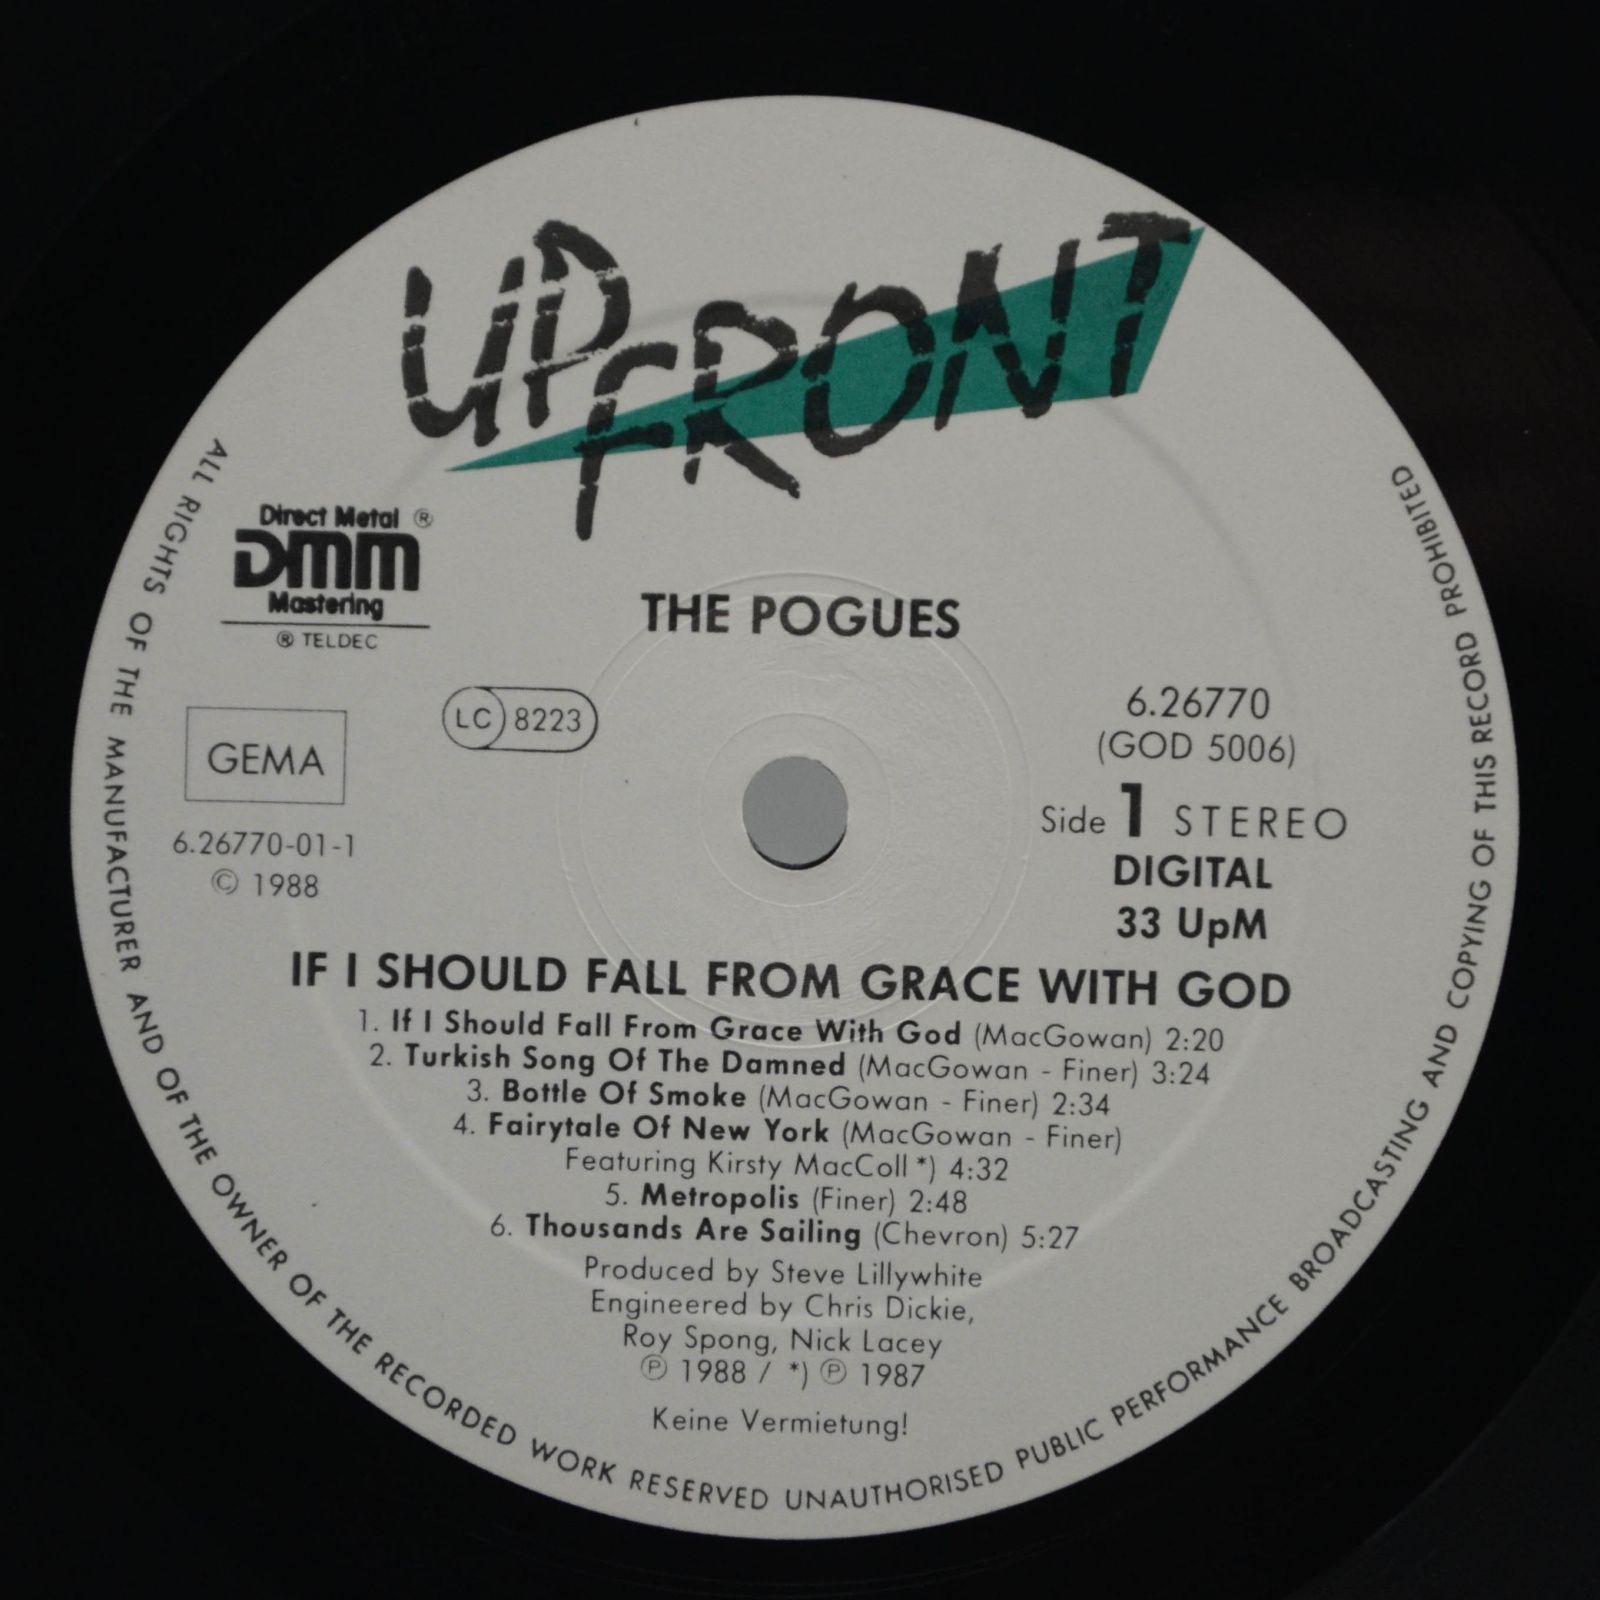 Pogues — If I Should Fall From Grace With God, 1988